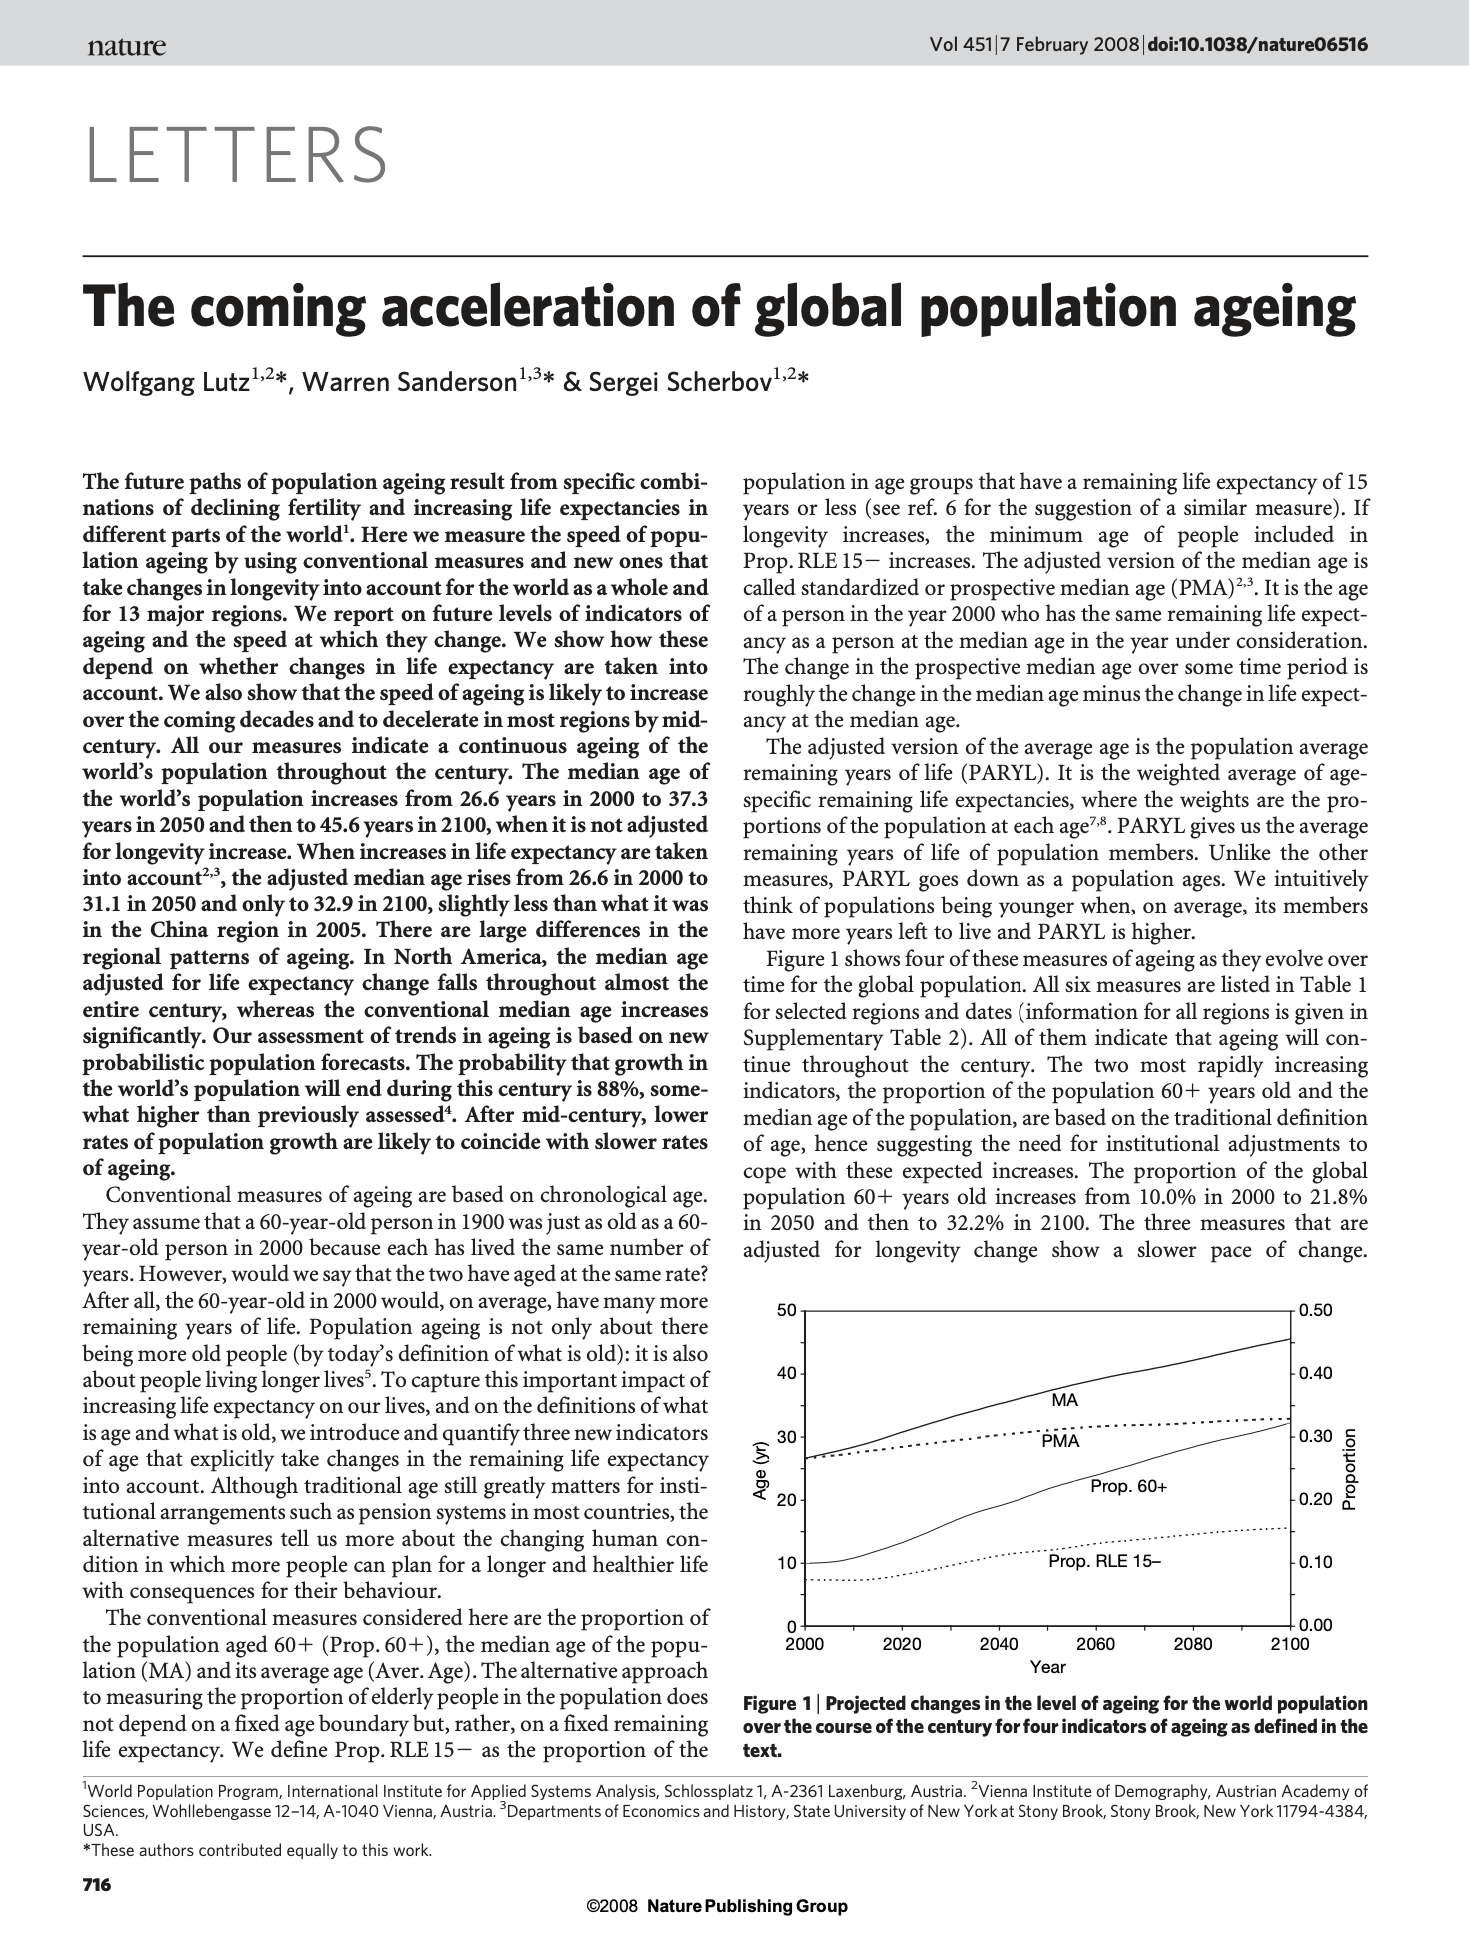 Publication: Lutz, W., Sanderson, W.C., & Scherbov, S. The coming acceleration of global population ageing. Nature, 451(7179), 716–719